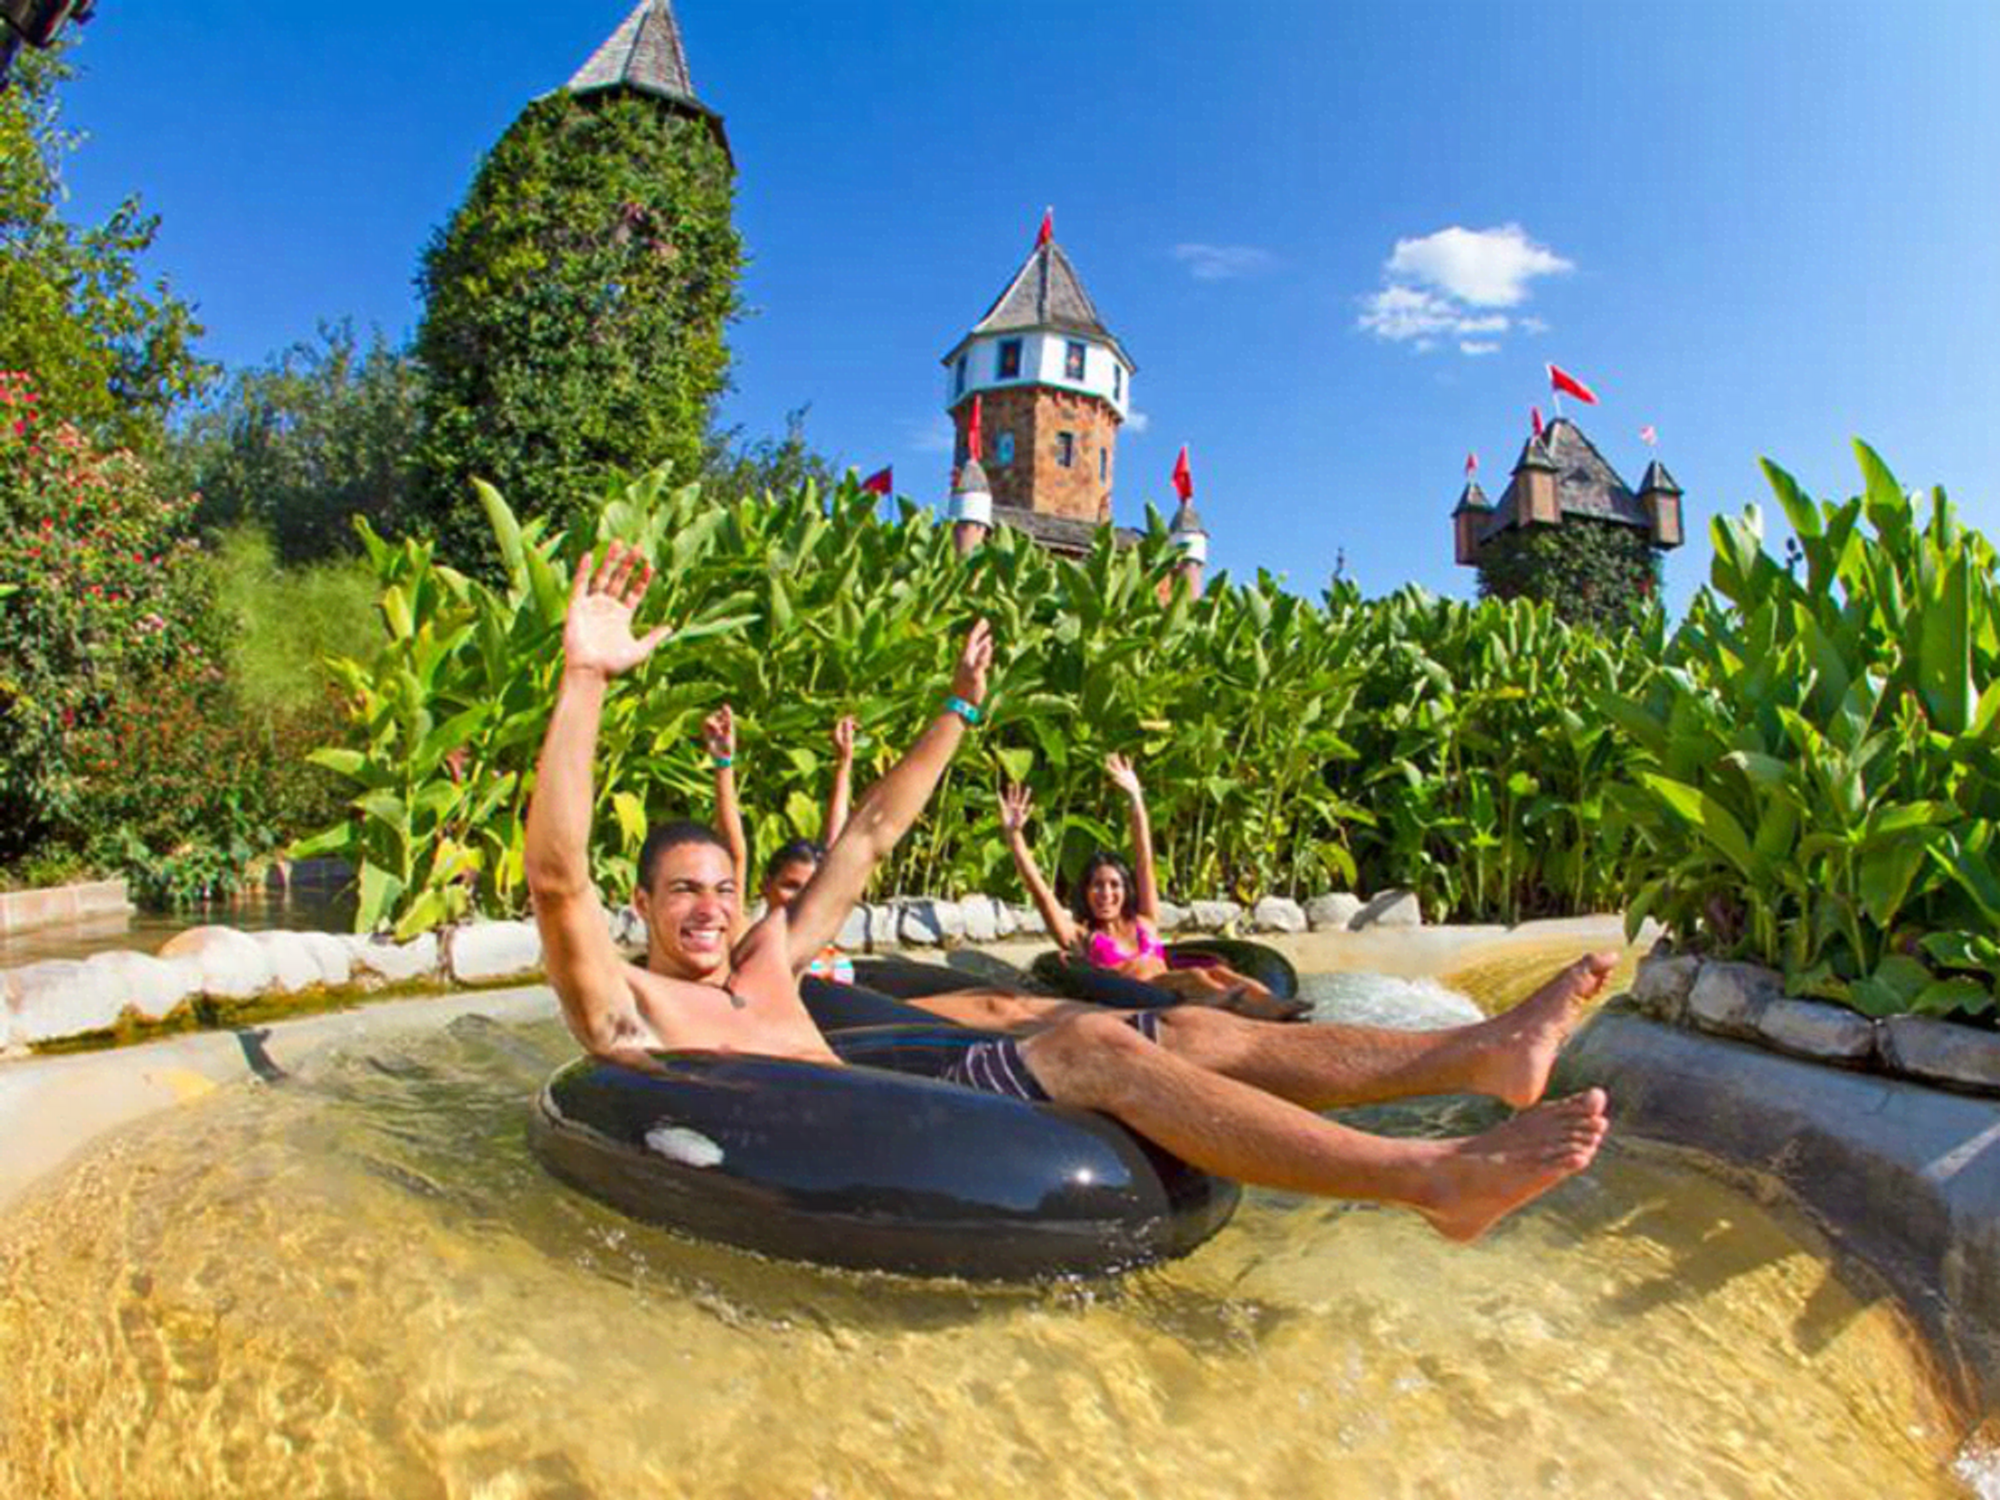 Schlitterbahn Water Park has plenty of rides, floats, and pools.